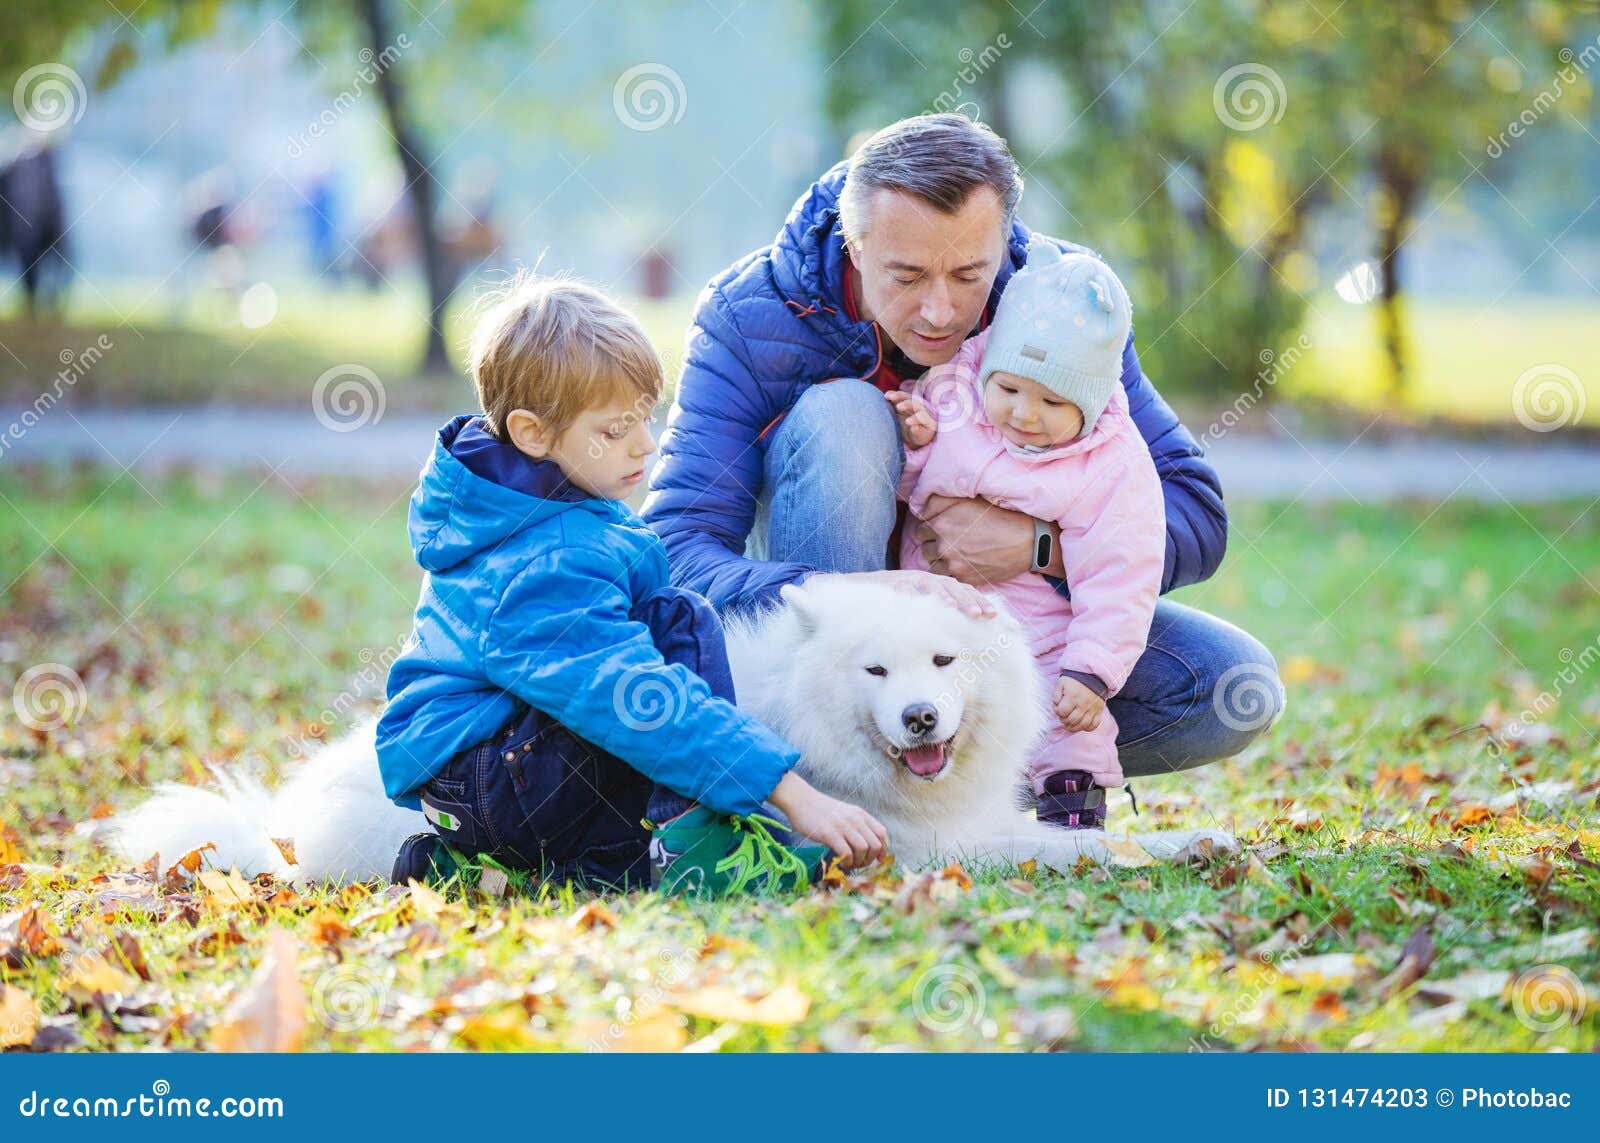 father with preschool son and baby daugther playing with his samoyed dog